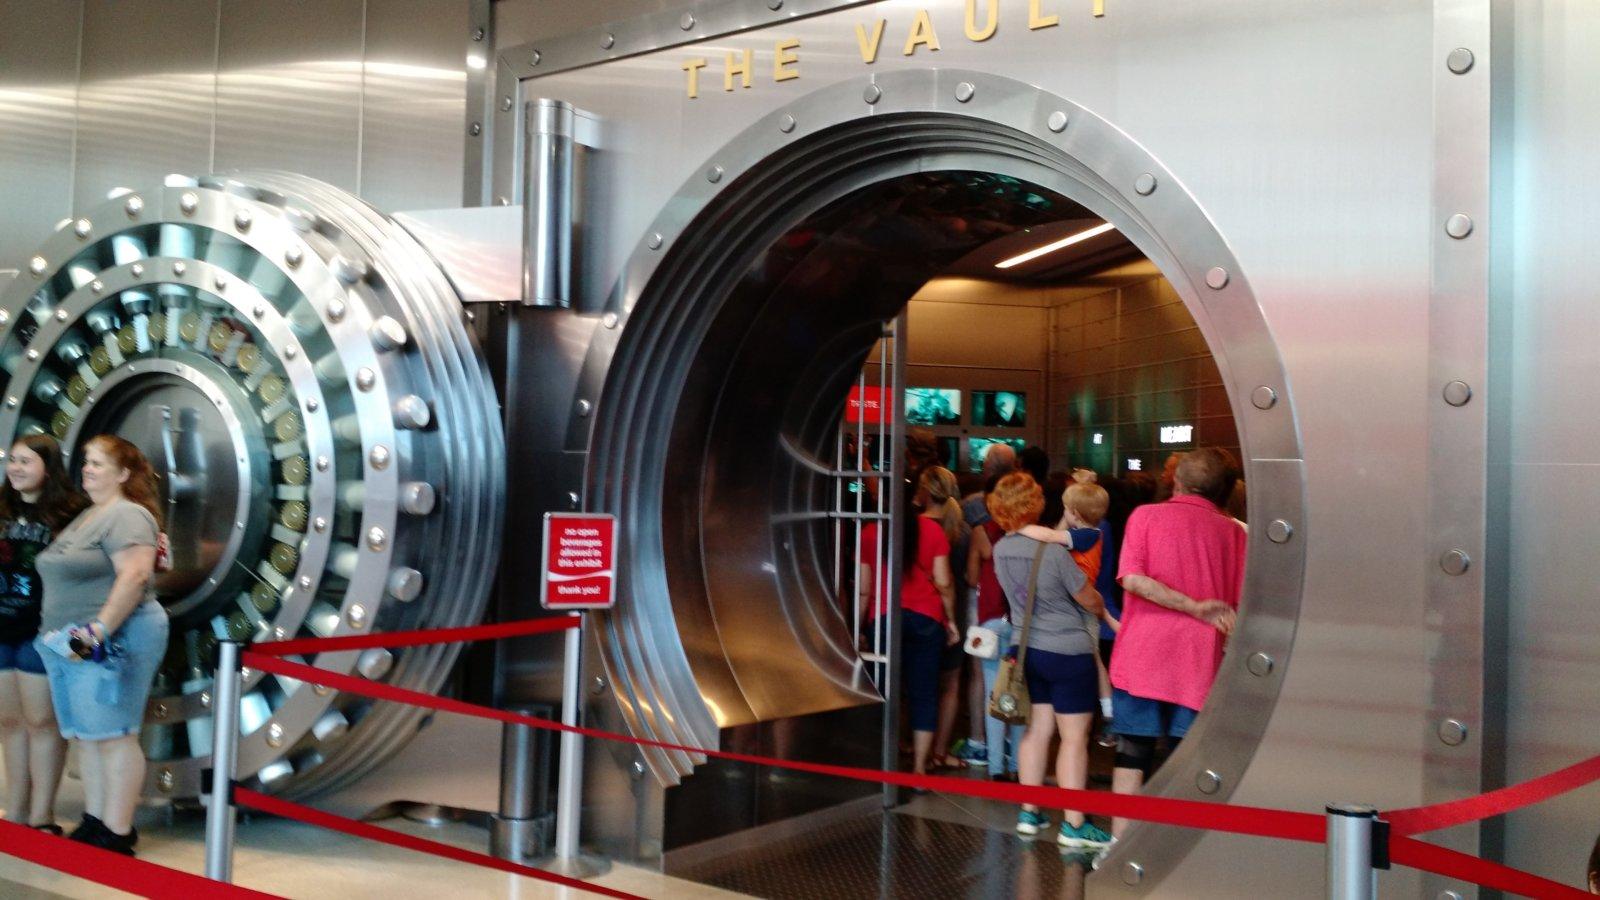 Heading into the vault to see the Secret Formula.